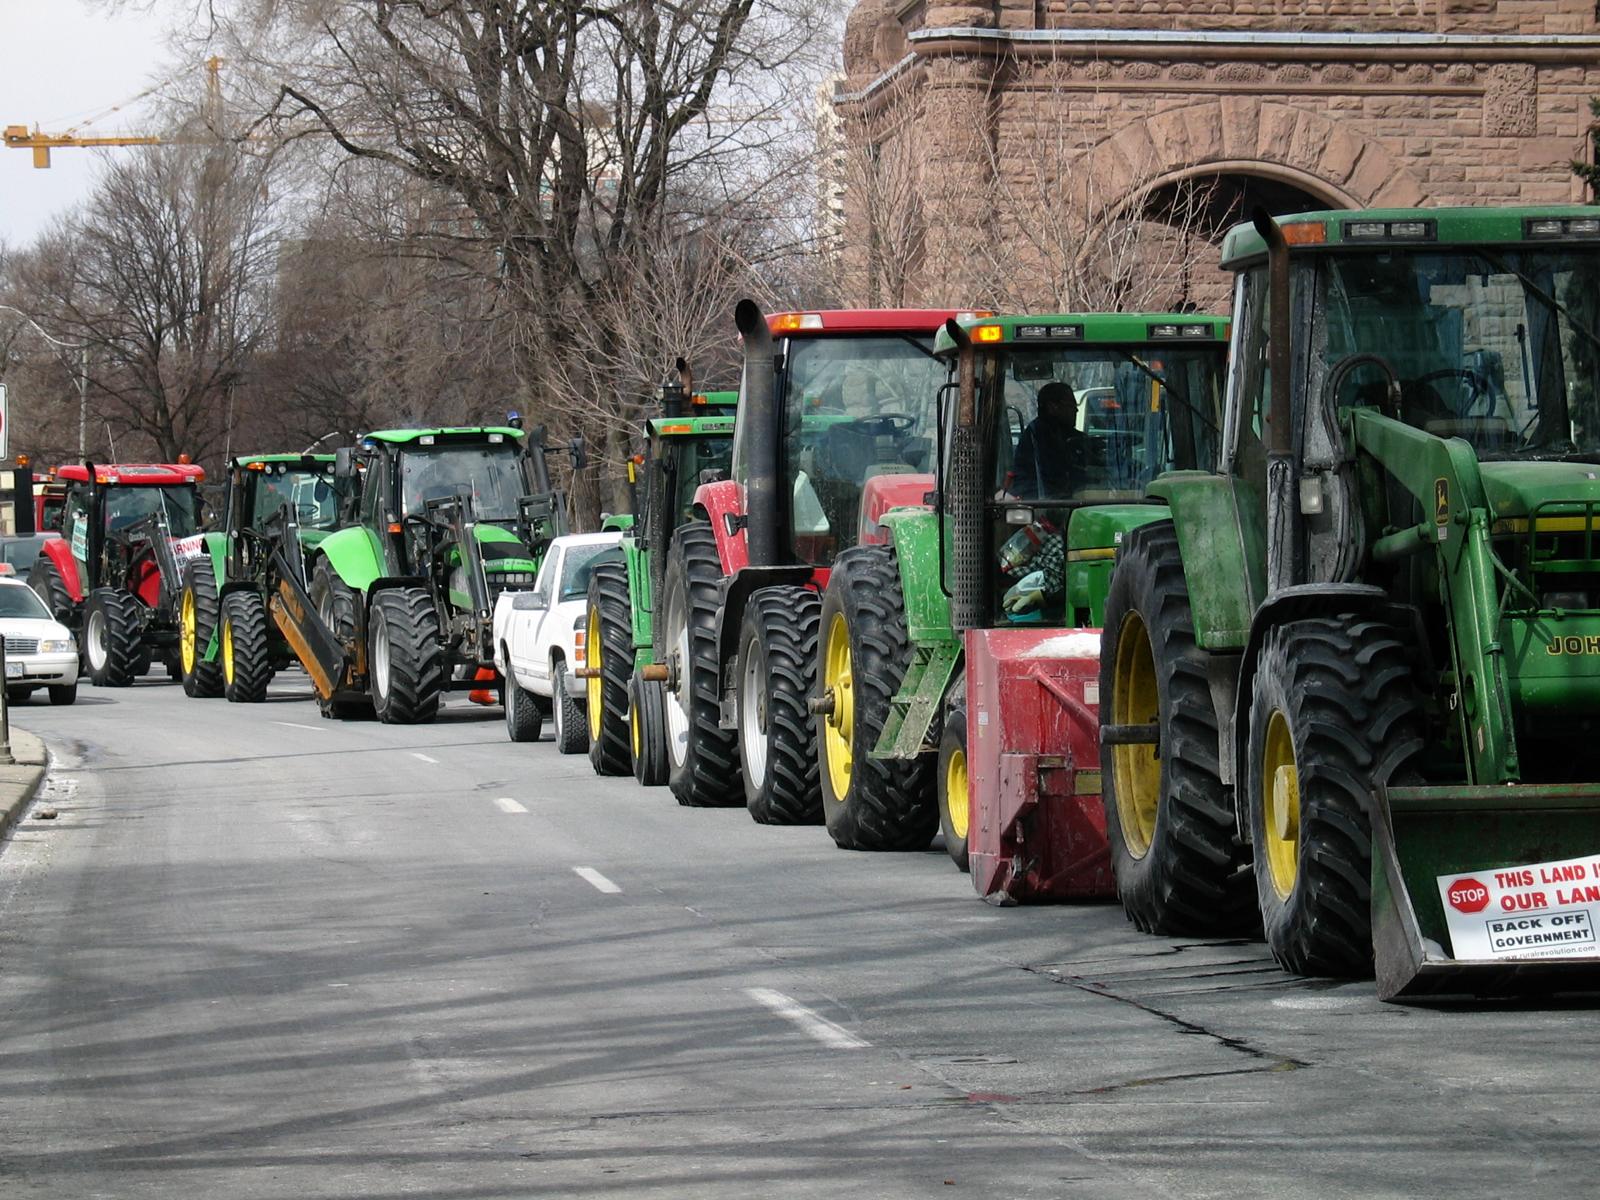 All the Tractors All Lined Up